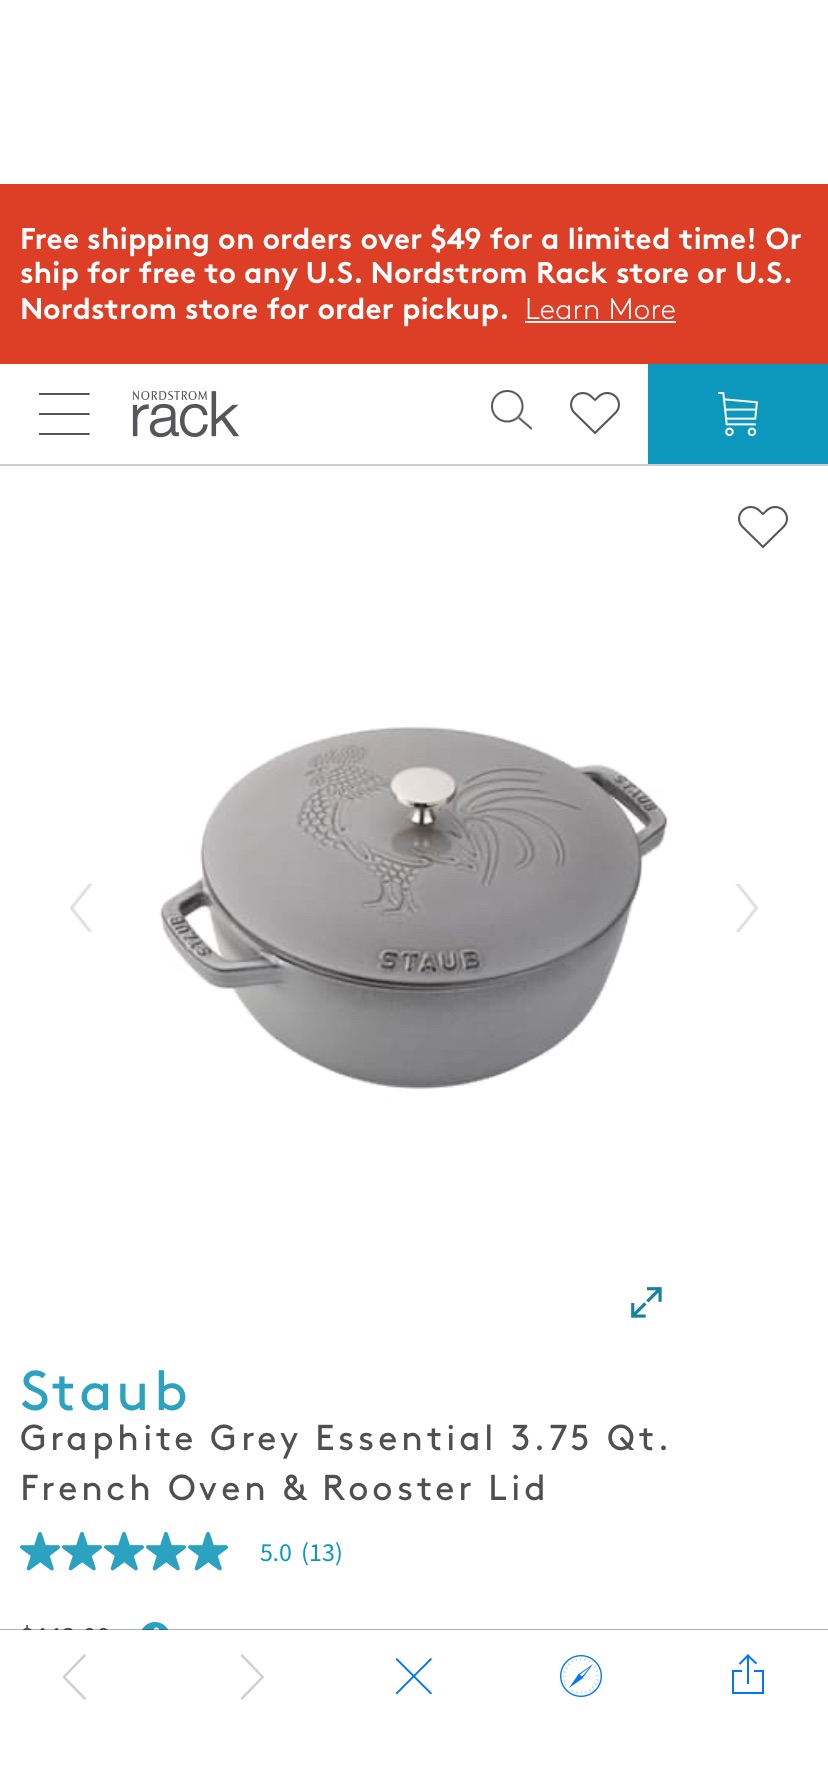 Staub | Graphite Grey Essential 3.75 Qt. French Oven & Rooster Lid | Nordstrom Rack 二五折stuab锅